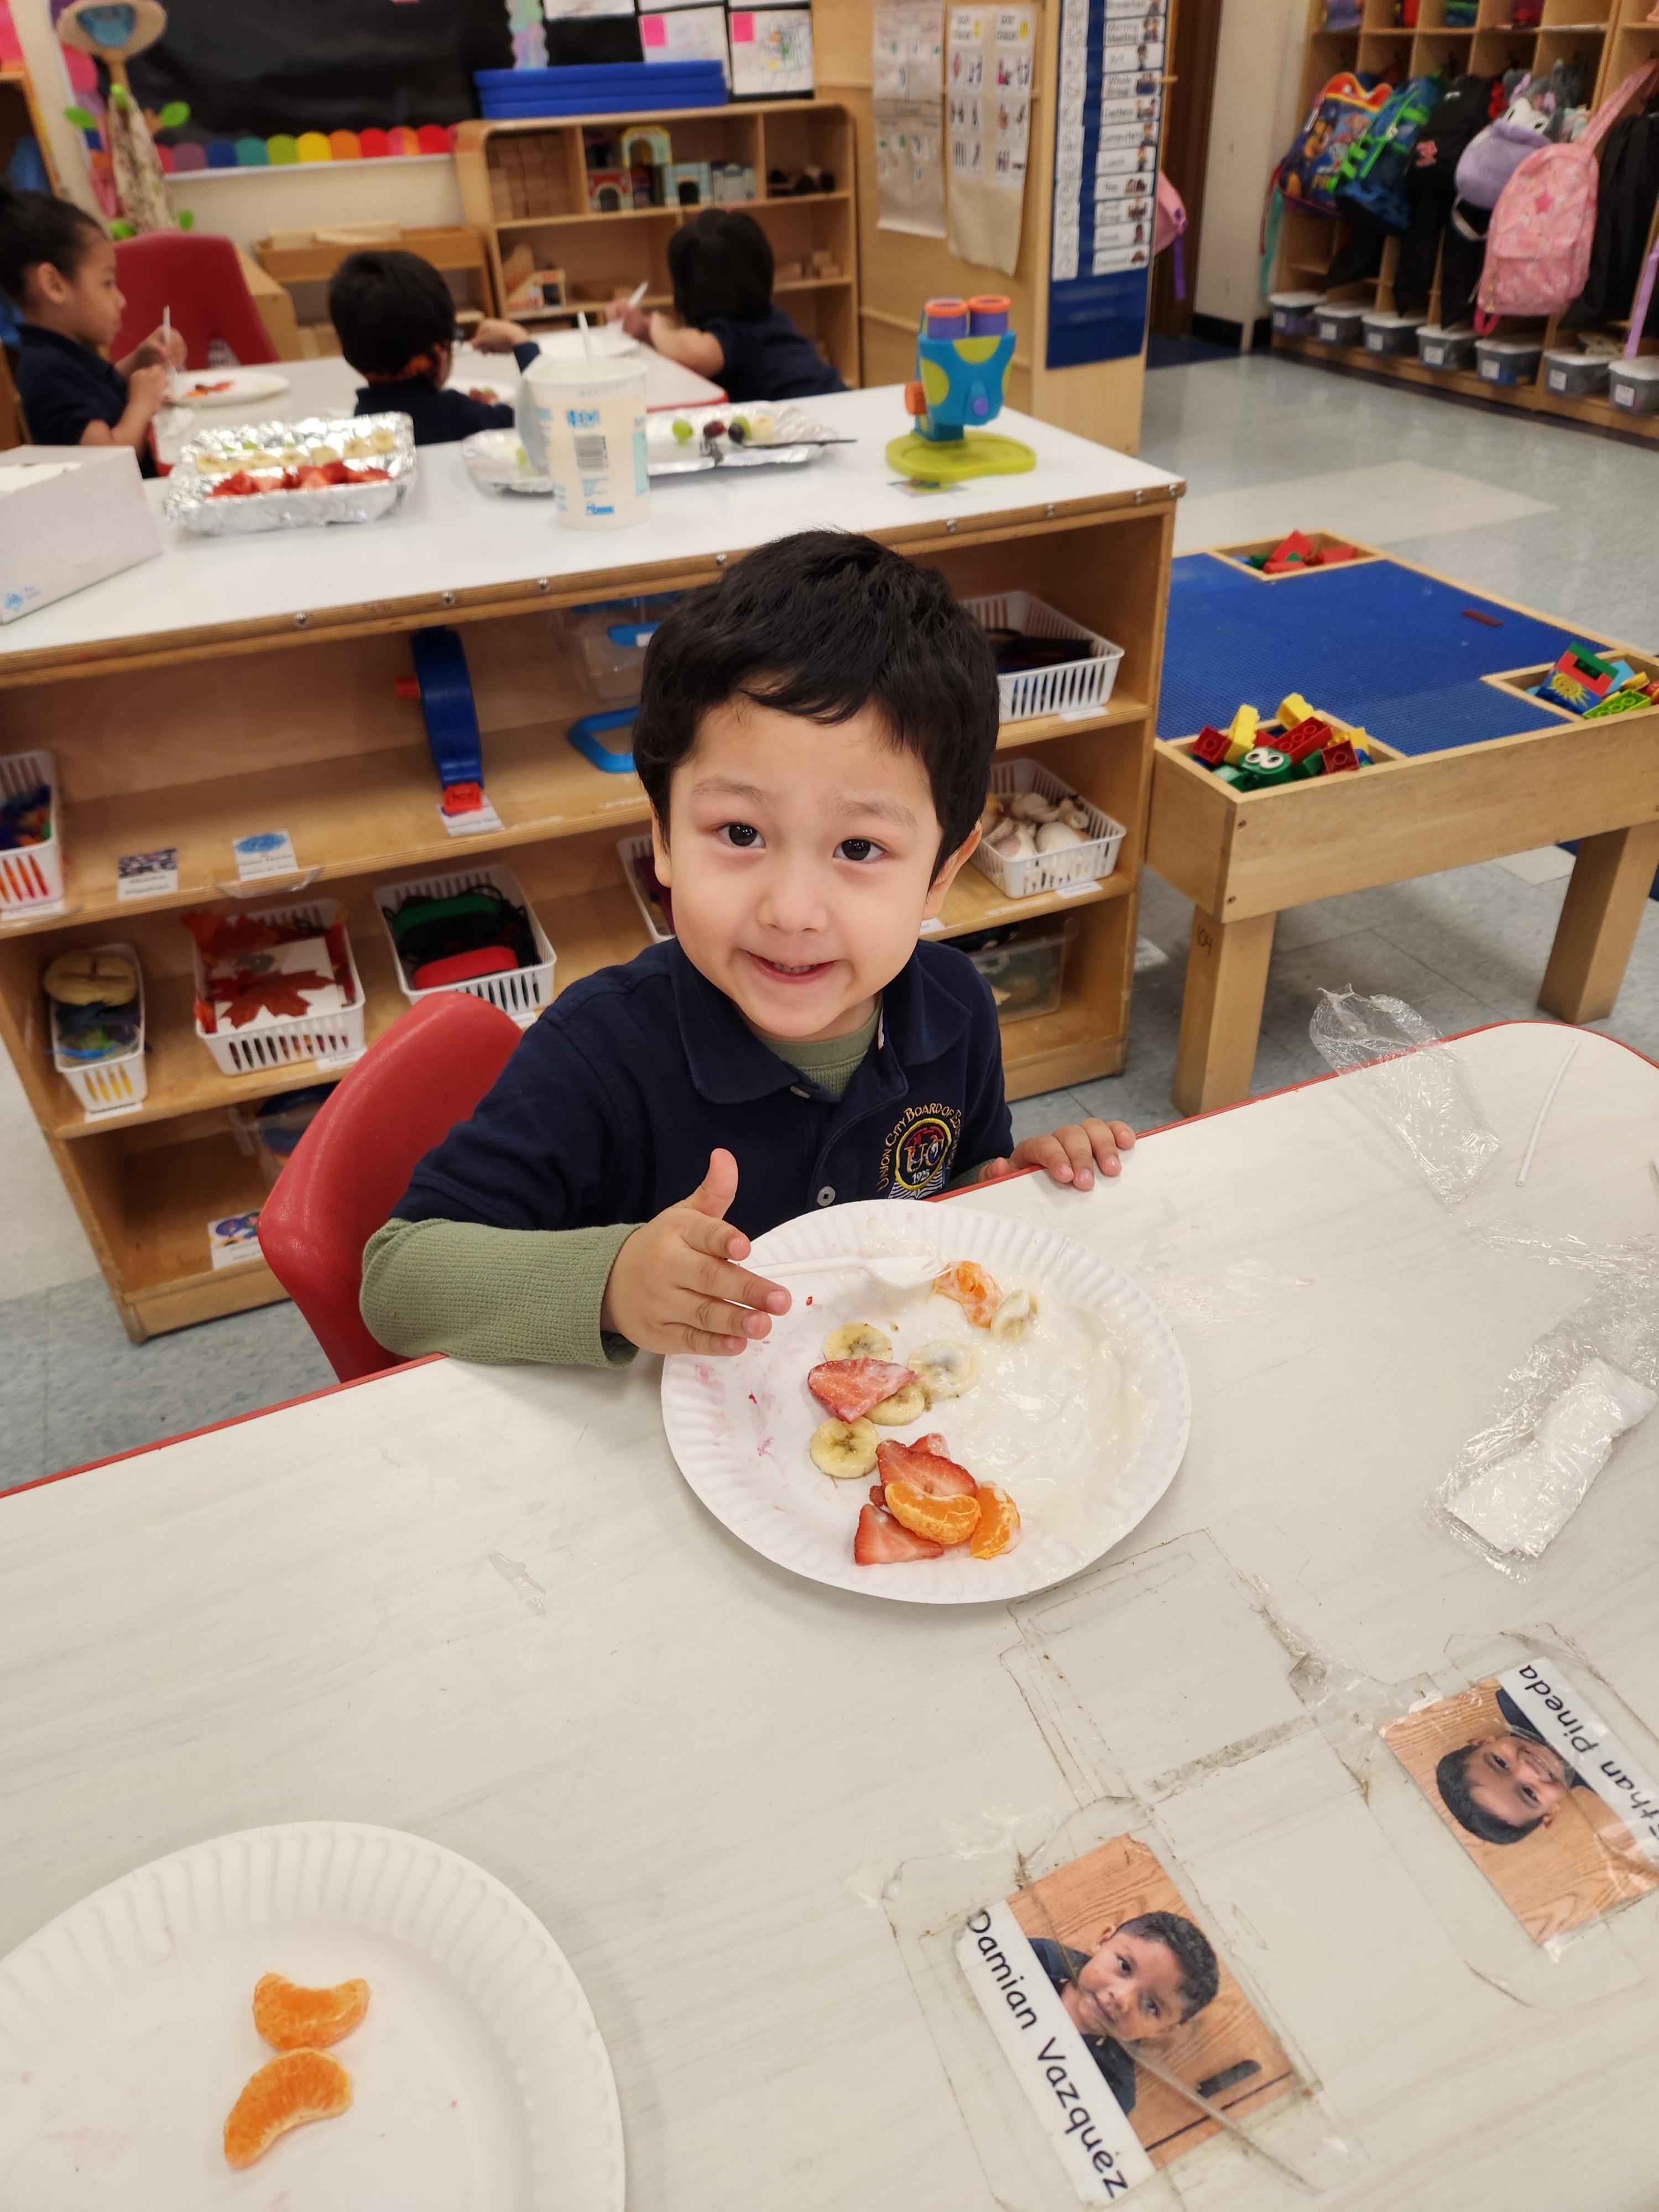 Tasty Tuesday at the Jefferson School